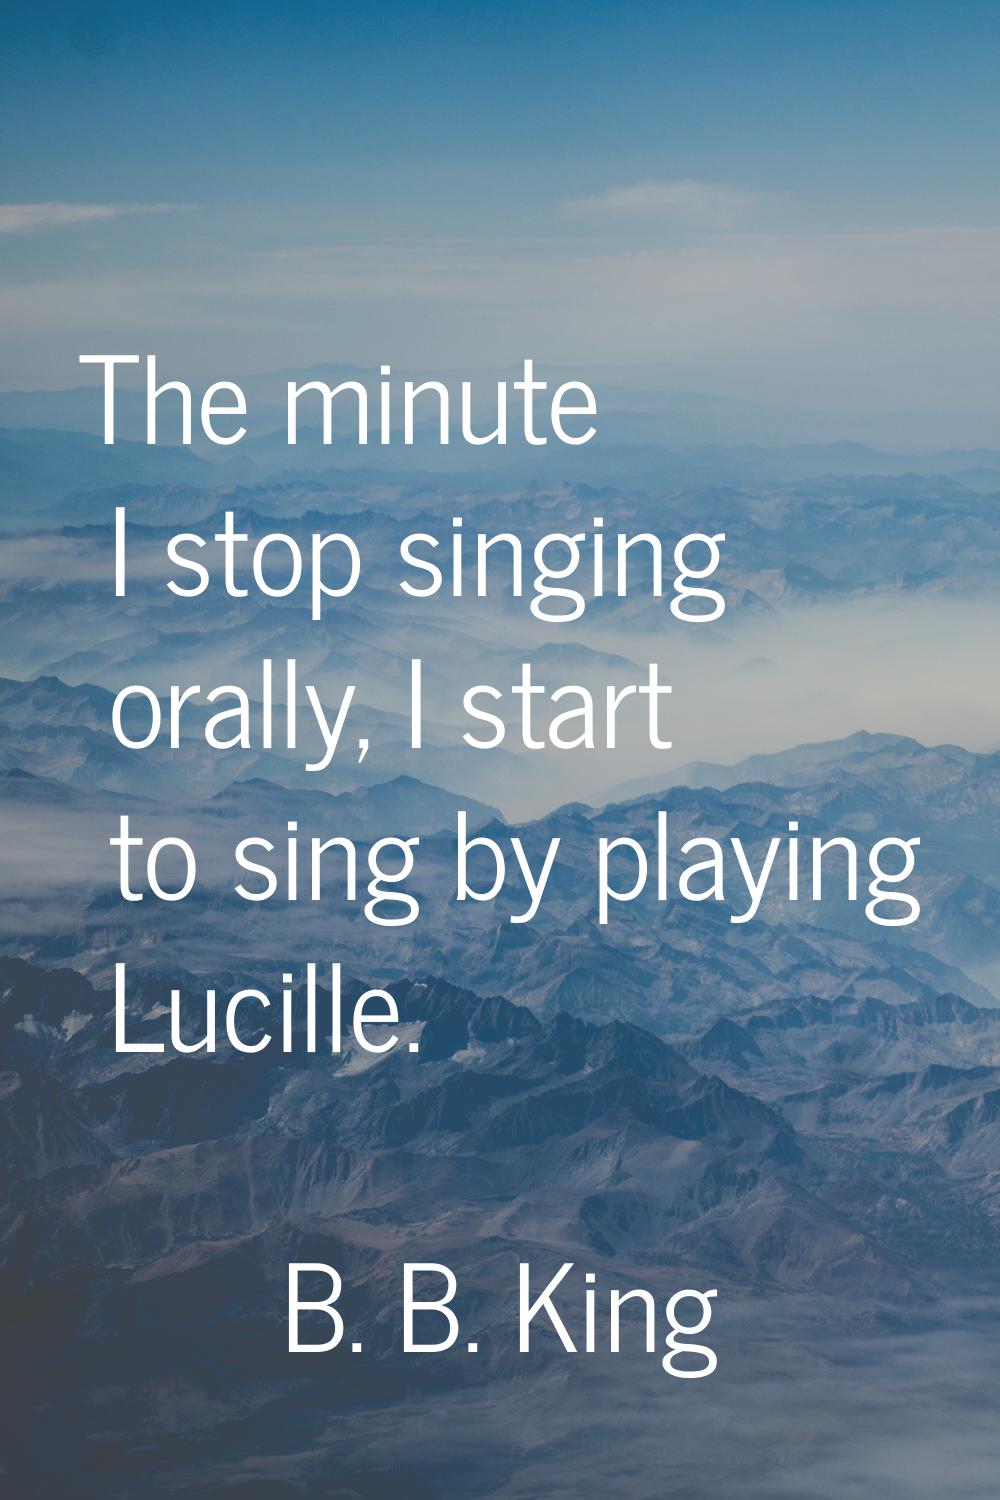 The minute I stop singing orally, I start to sing by playing Lucille.